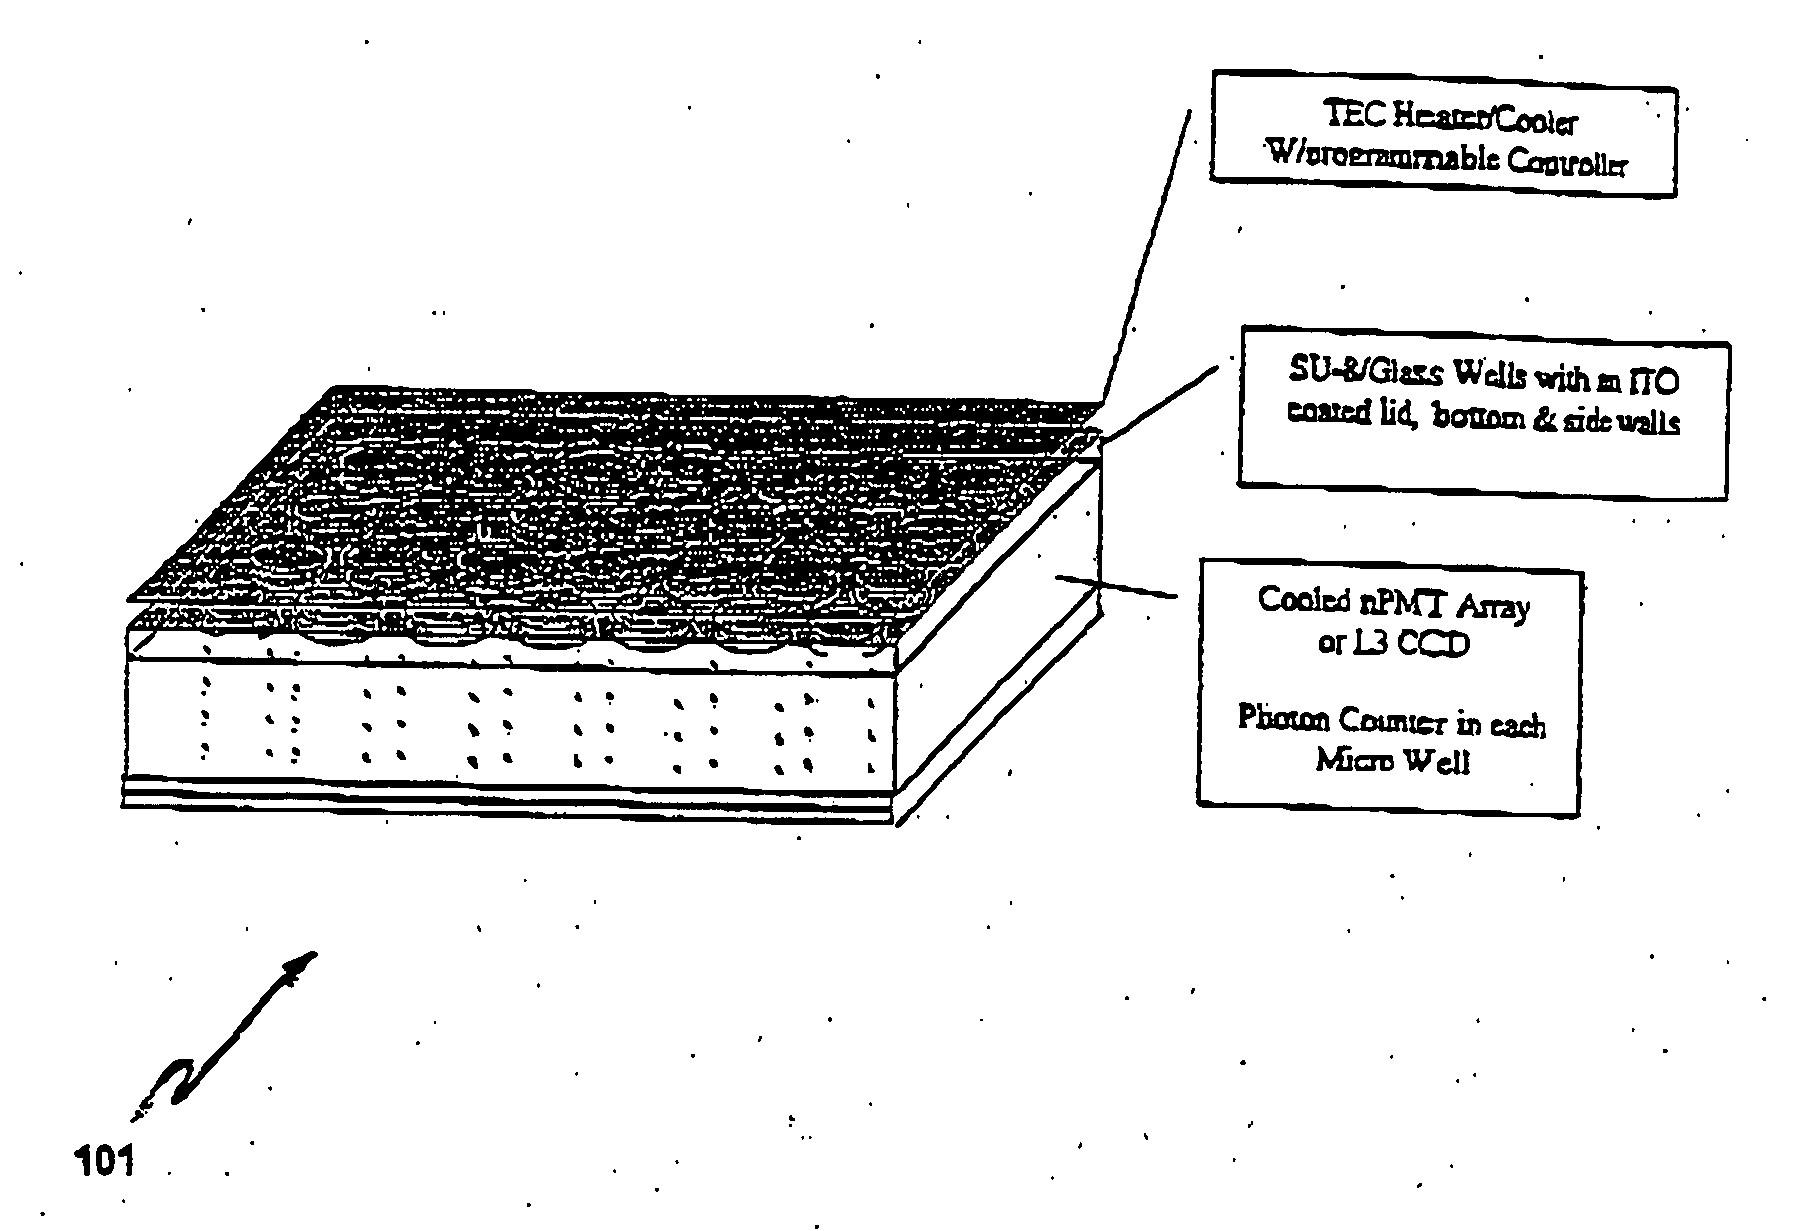 Apparatus and method for multiplex analysis